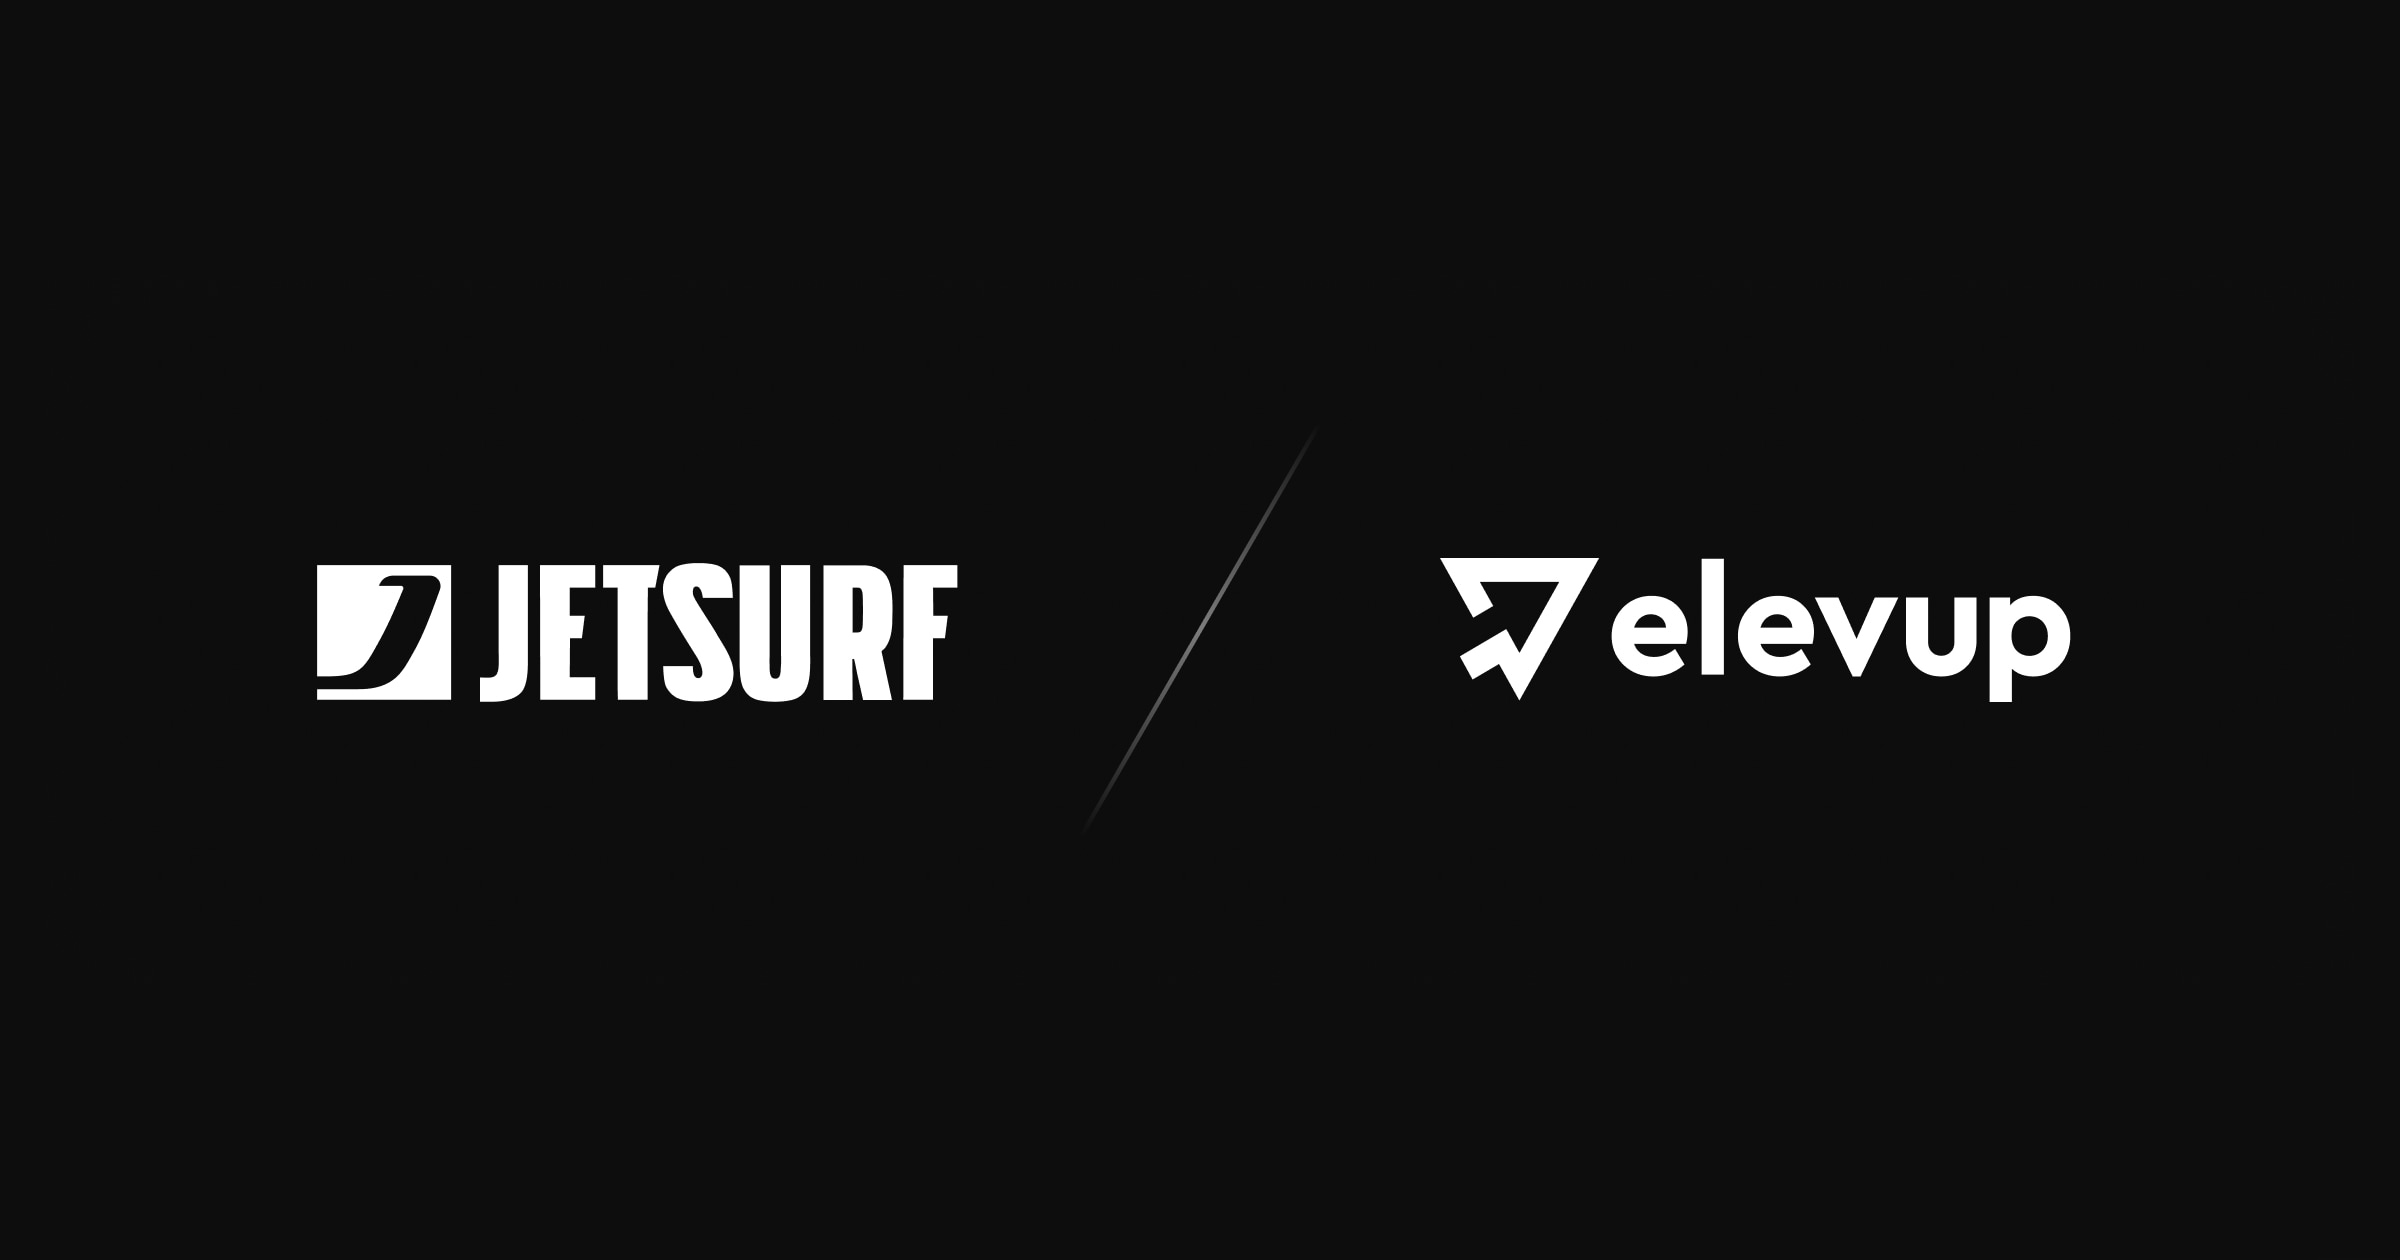 JETSURF becomes elevup's latest client 